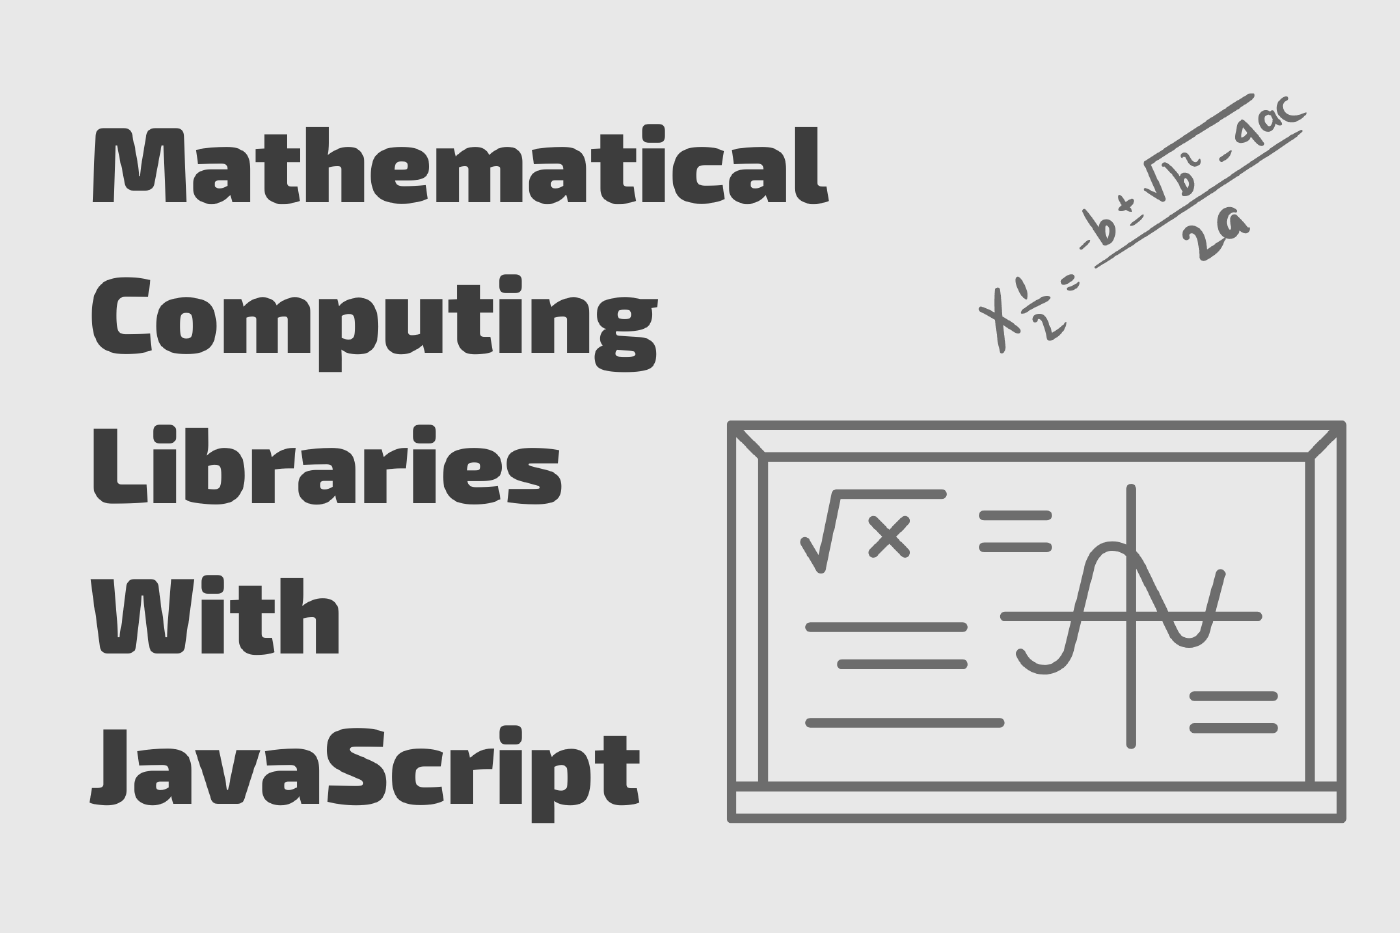 JavaScript Libraries for Mathematical Computing: 5 Projects You Should Know About